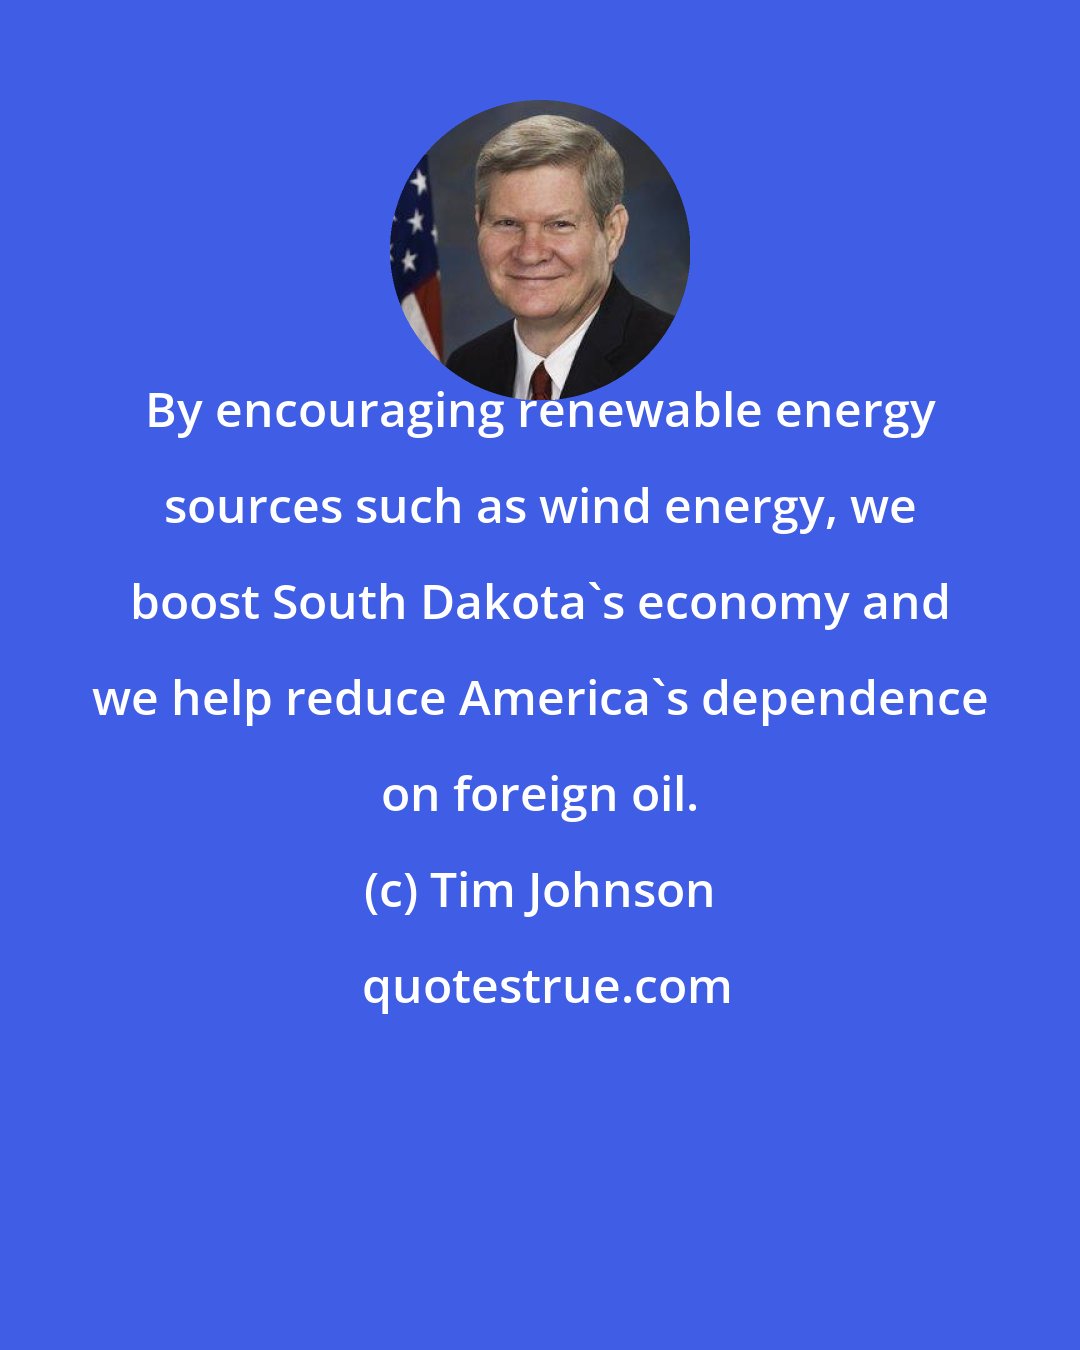 Tim Johnson: By encouraging renewable energy sources such as wind energy, we boost South Dakota's economy and we help reduce America's dependence on foreign oil.